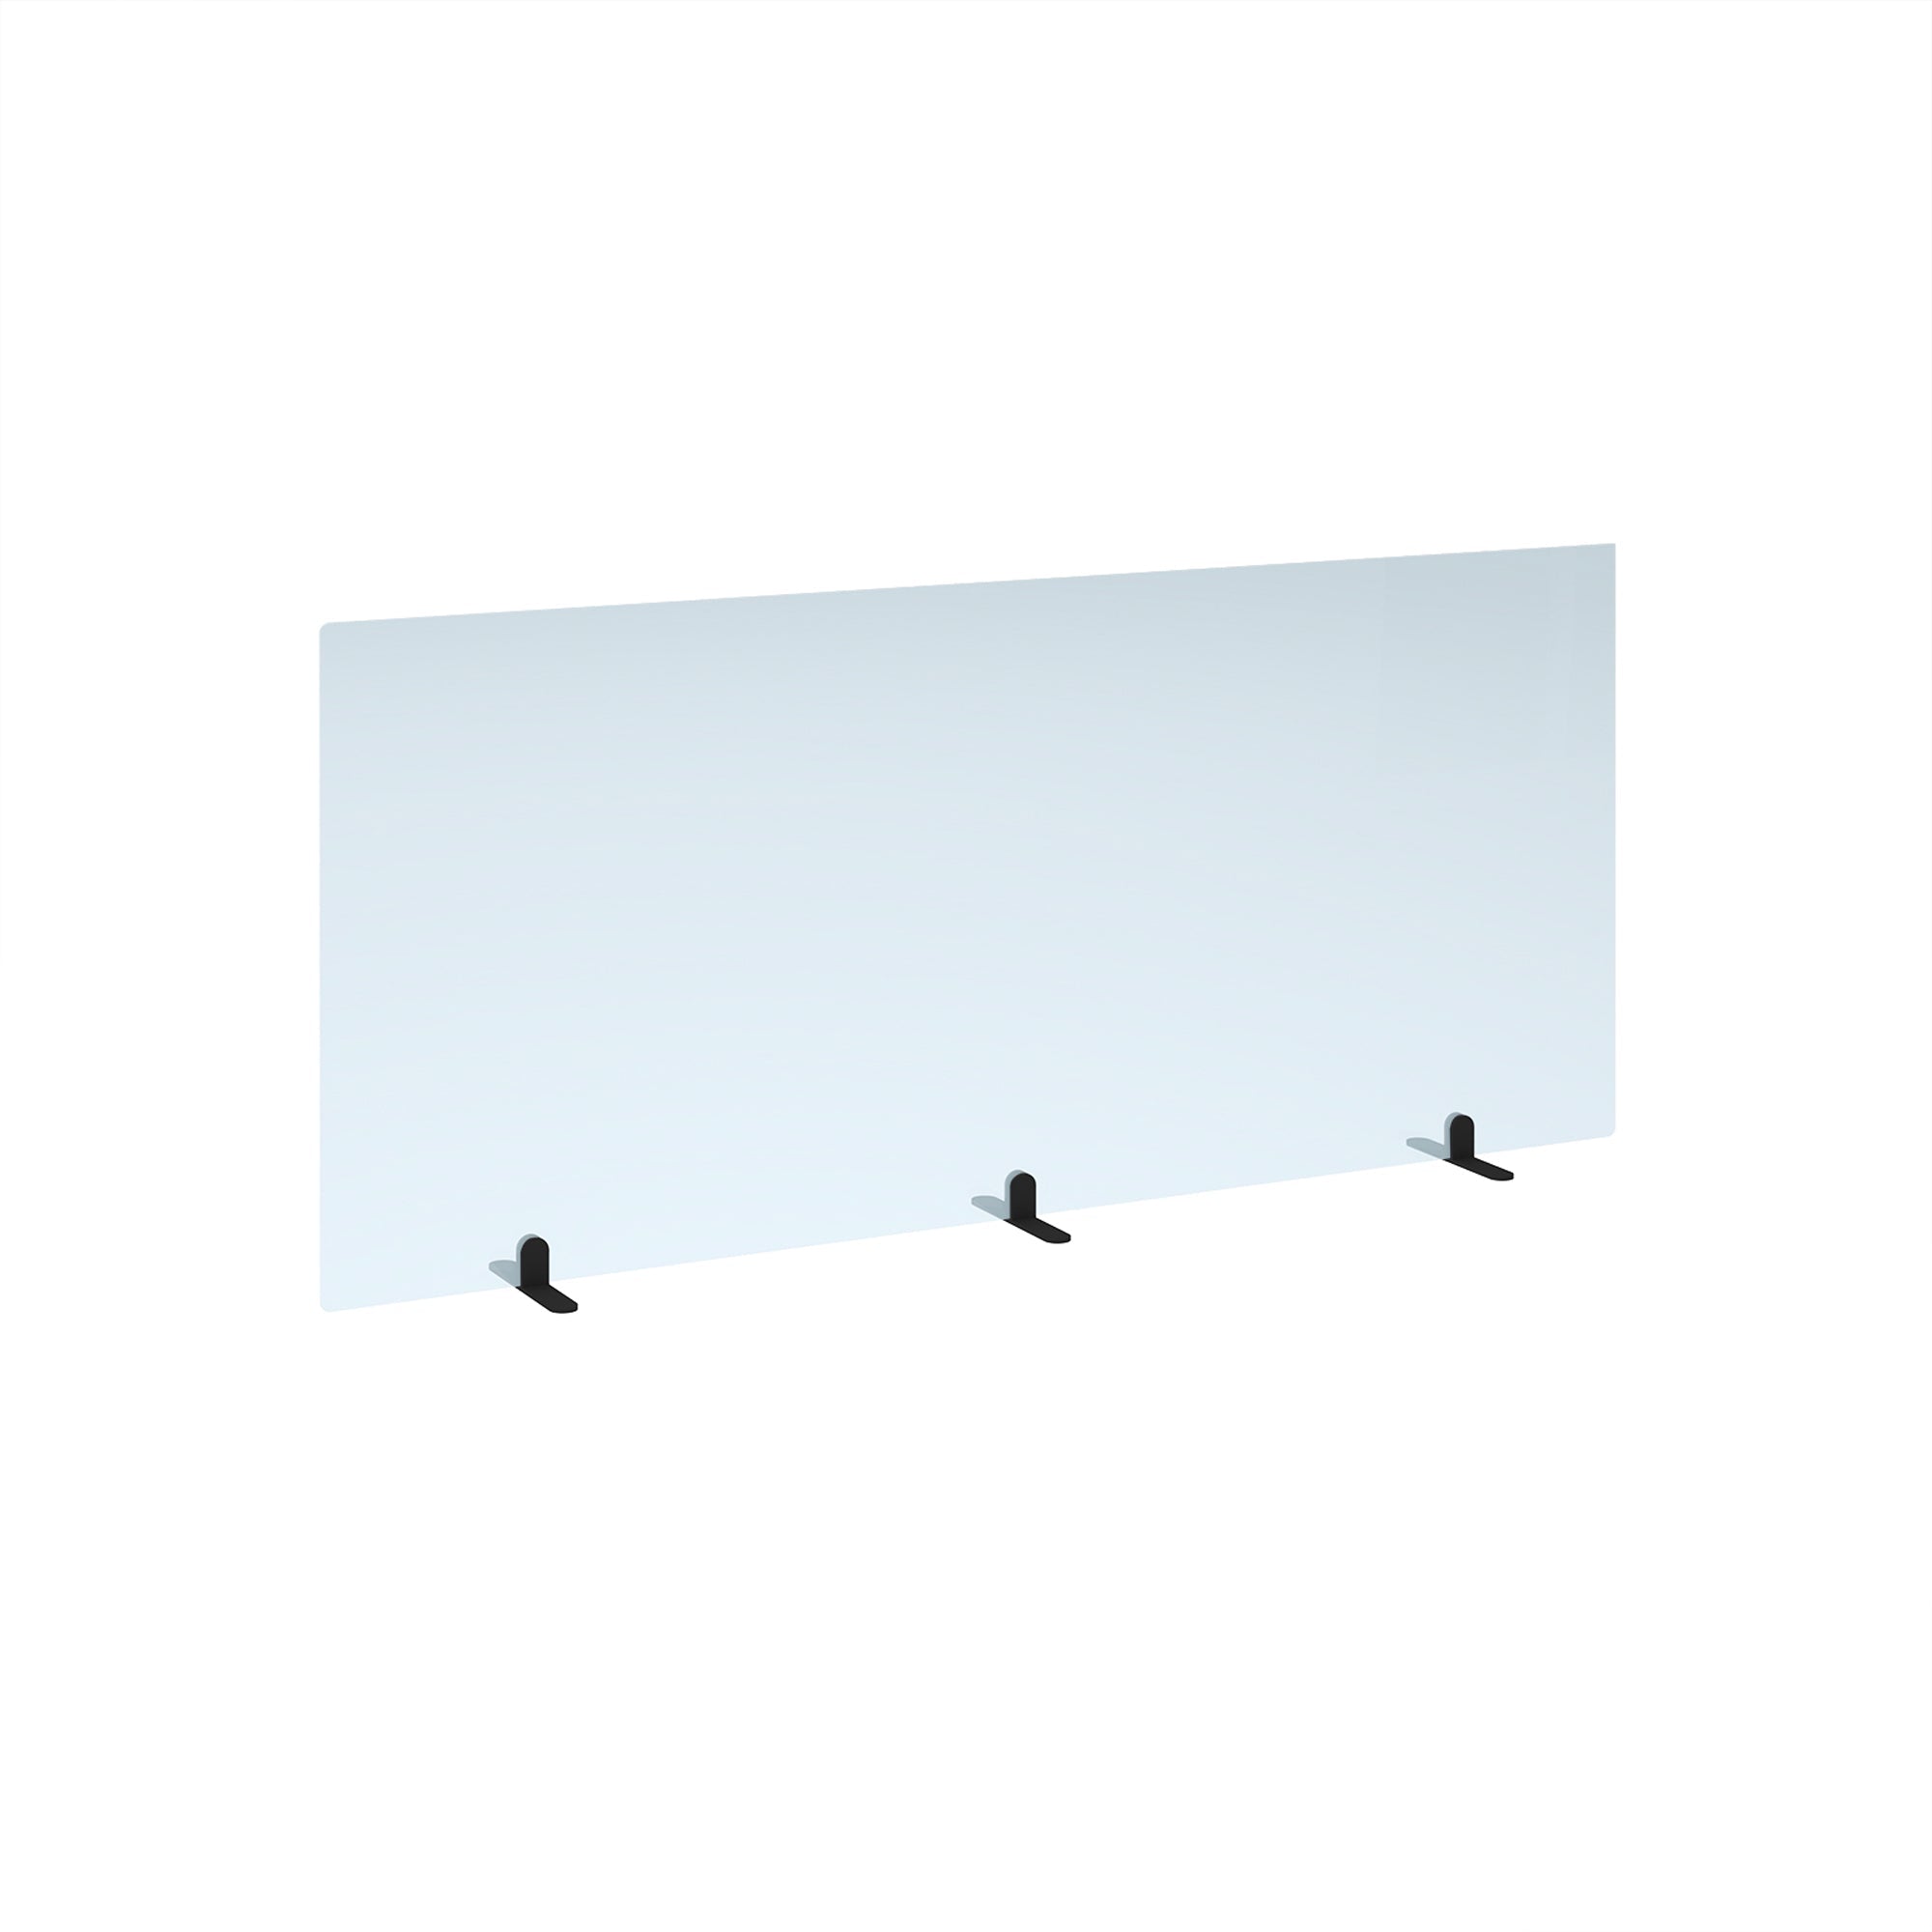 Free standing acrylic 700mm high screen - Office Products Online